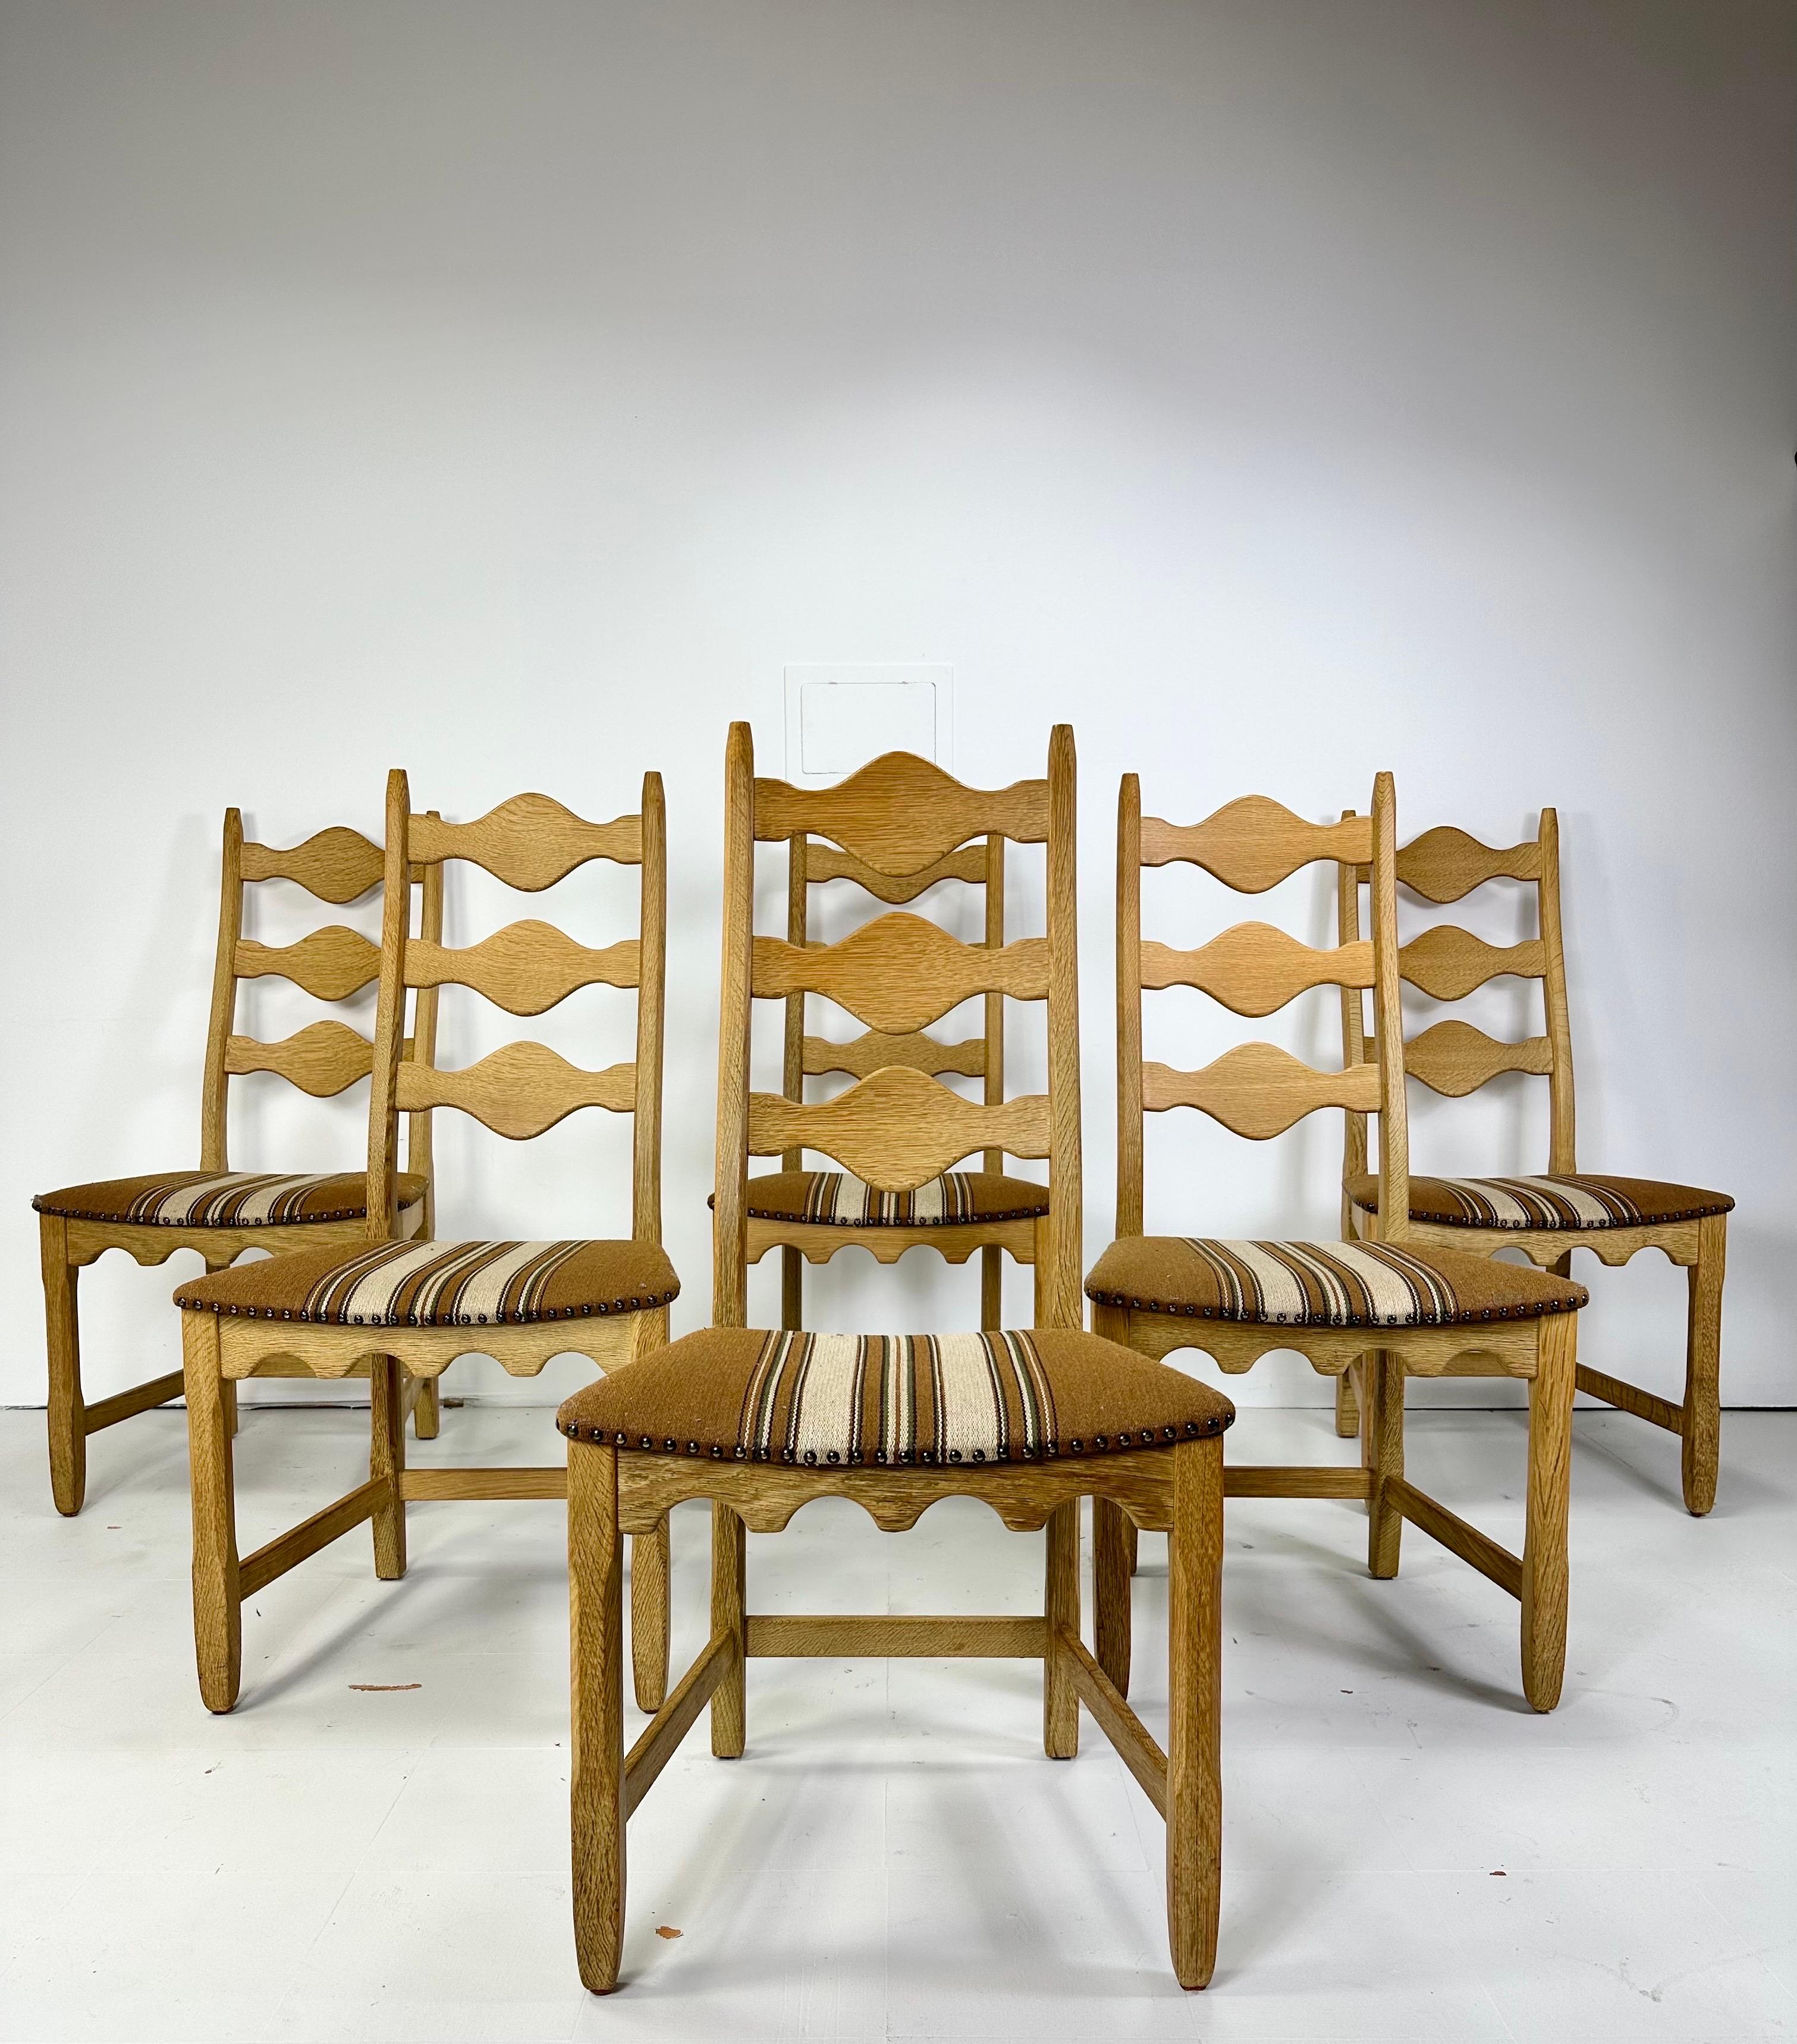 Set of Six dining chairs by Henning Kjaernulf for Nyrup Mobelfabrik. Sculpted Oak frames have a warm rustic and modern feel. Curved backs make these Highback chairs actually comfortable to sit in. Original wool upholstery with nail head details.